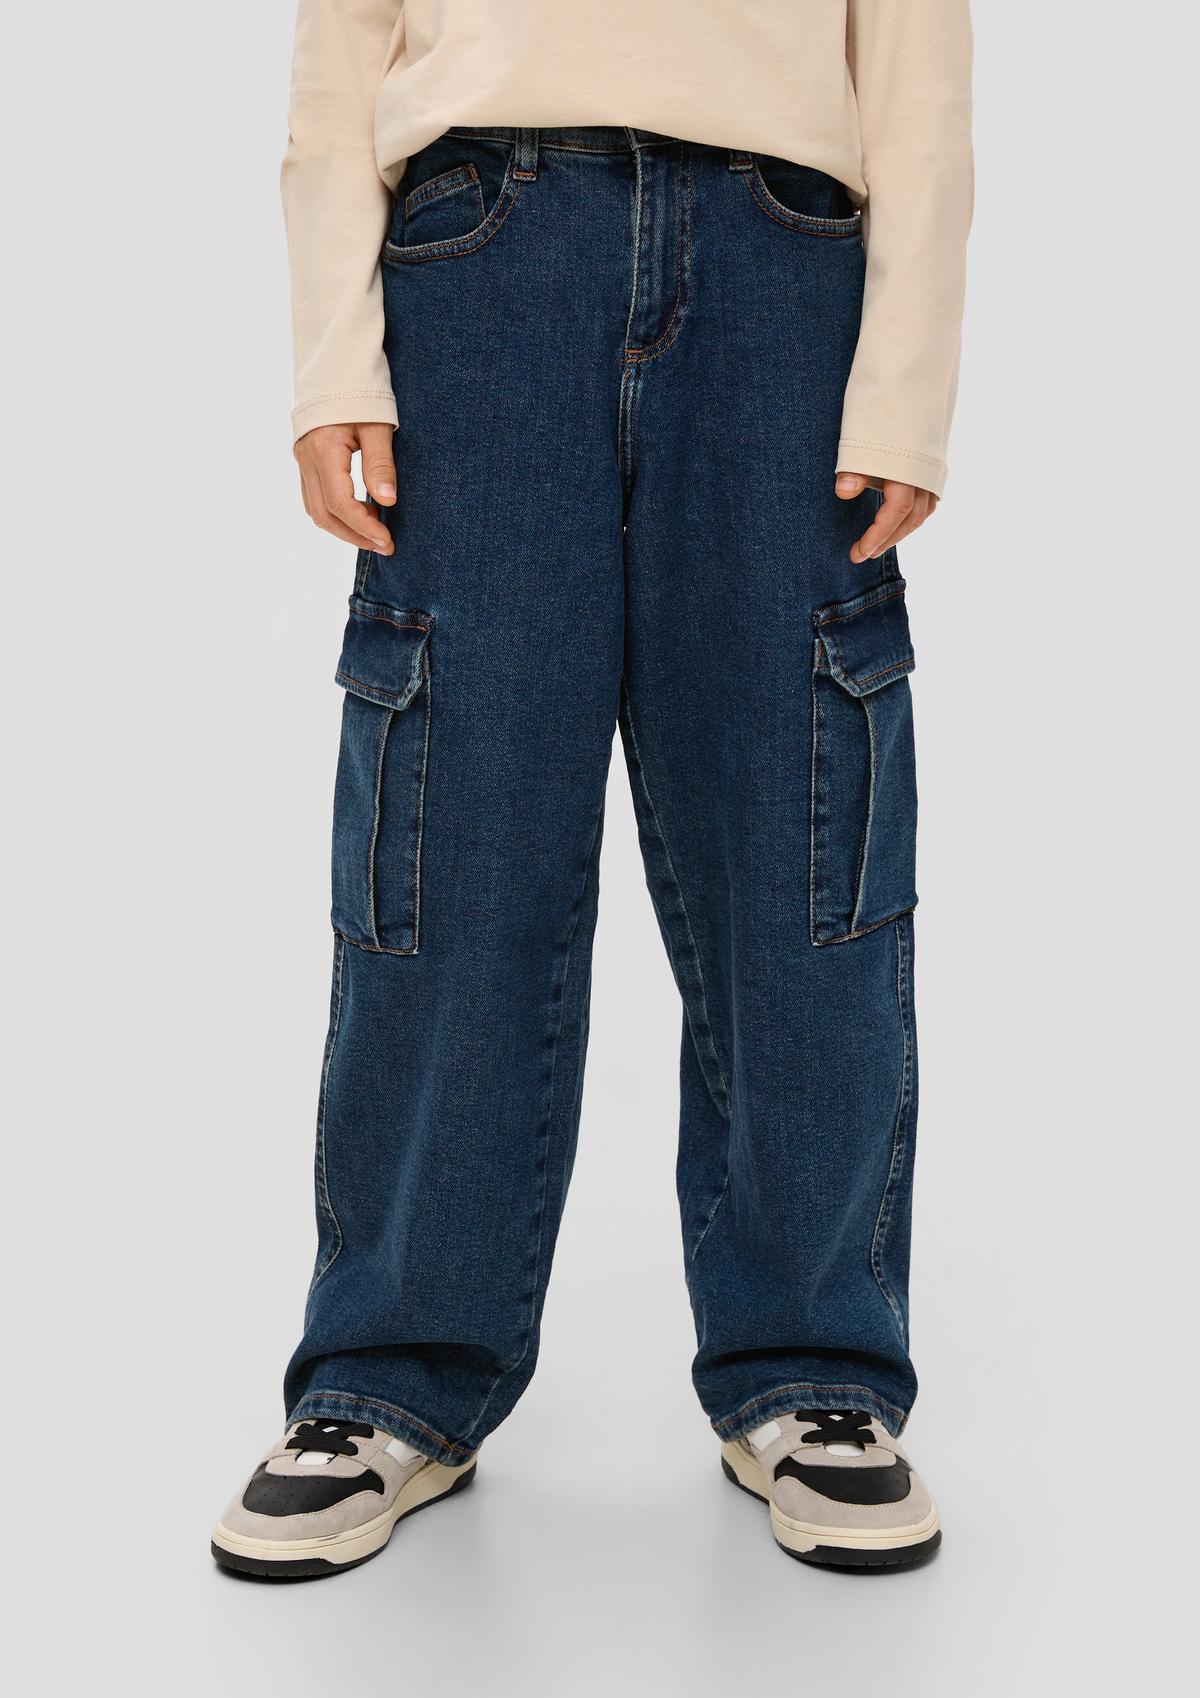 Jeans / relaxed fit / mid rise / wide leg / cargo pockets